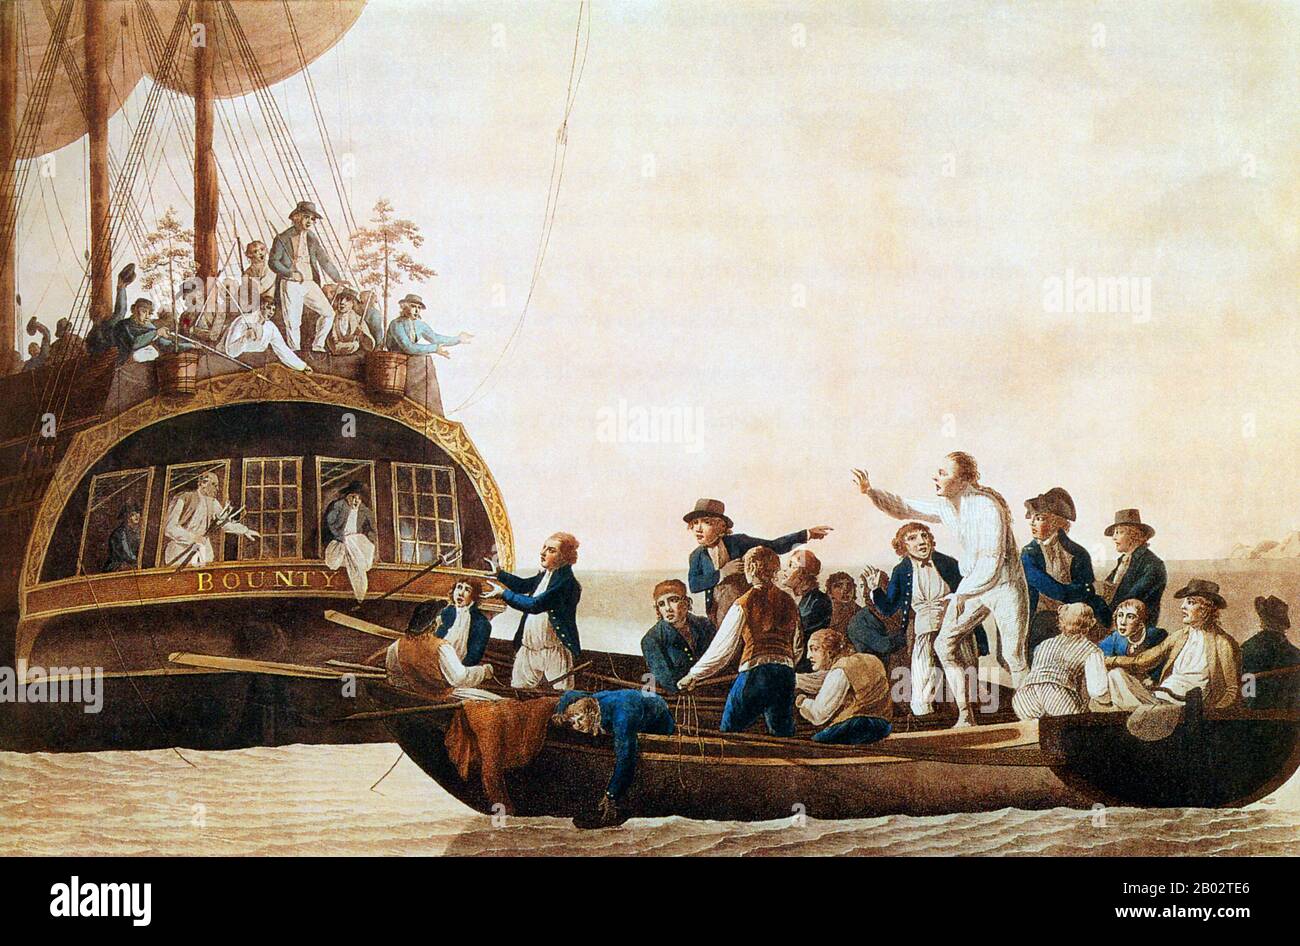 The Mutiny on the Bounty was a mutiny aboard the Royal Navy ship HMS Bounty on 28 April 1789. The mutiny was led by Fletcher Christian against their captain, Lieutenant William Bligh.  Eighteen mutineers set Bligh afloat in a small boat with eighteen of the twenty-two crew loyal to him. To avoid detection and prevent desertion, the mutineers then variously settled on Pitcairn Island or on Tahiti and burned Bounty off Pitcairn. Stock Photo